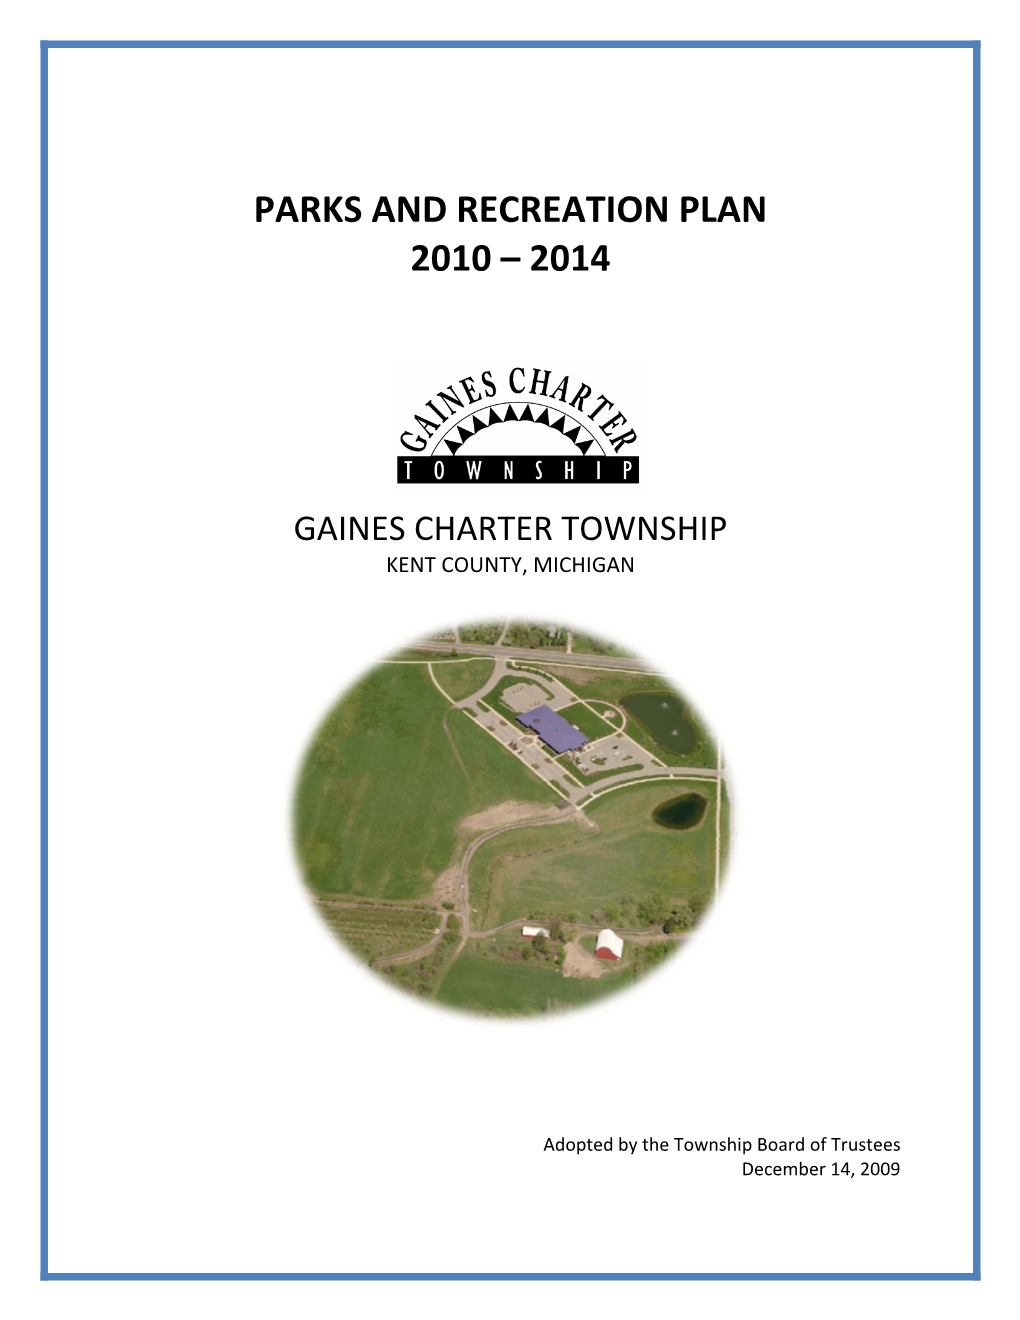 Parks and Recreation Plan 2010 – 2014